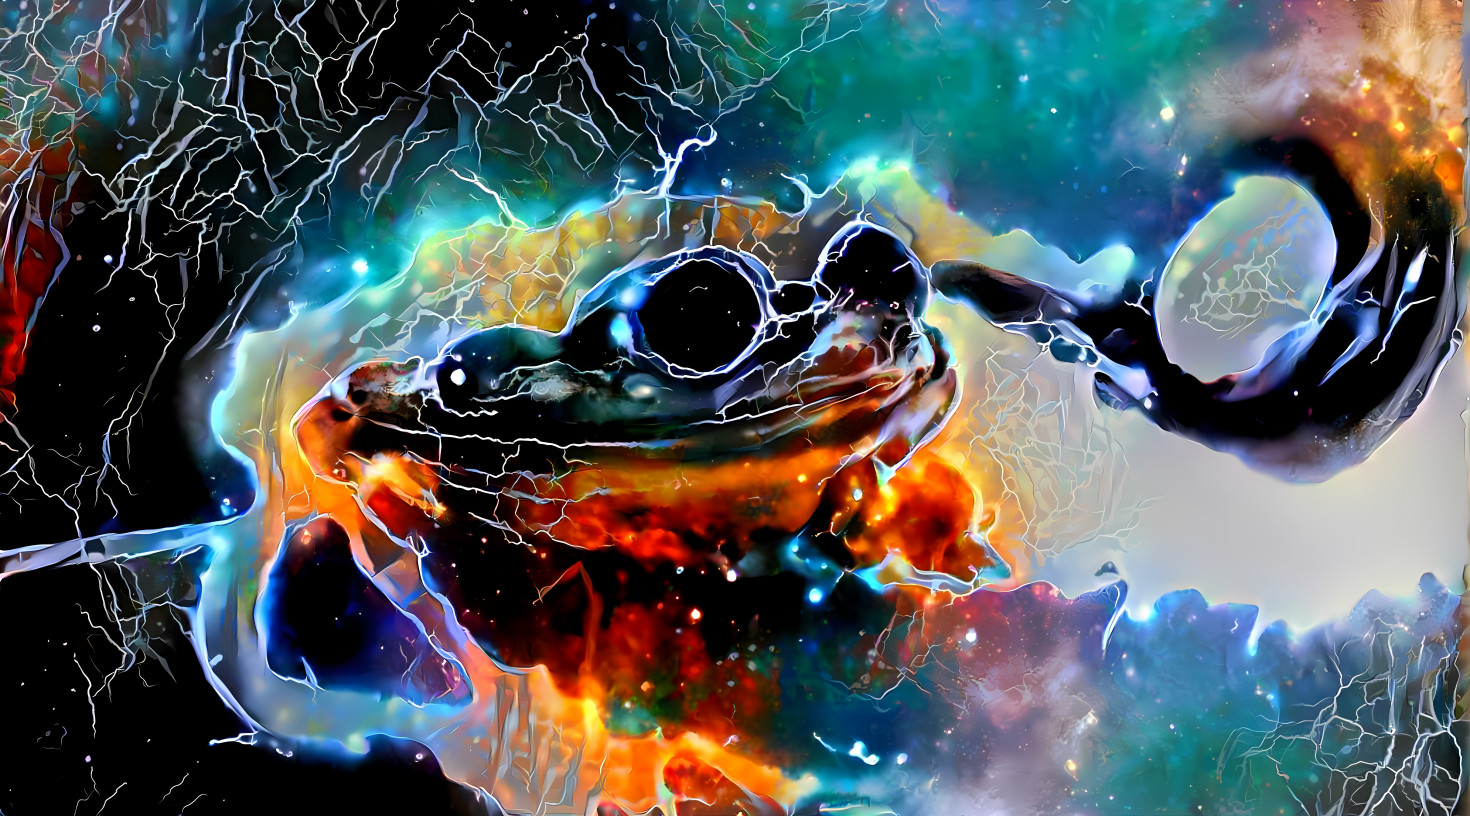 The frog eats fly funguses in the ring of Saturn 